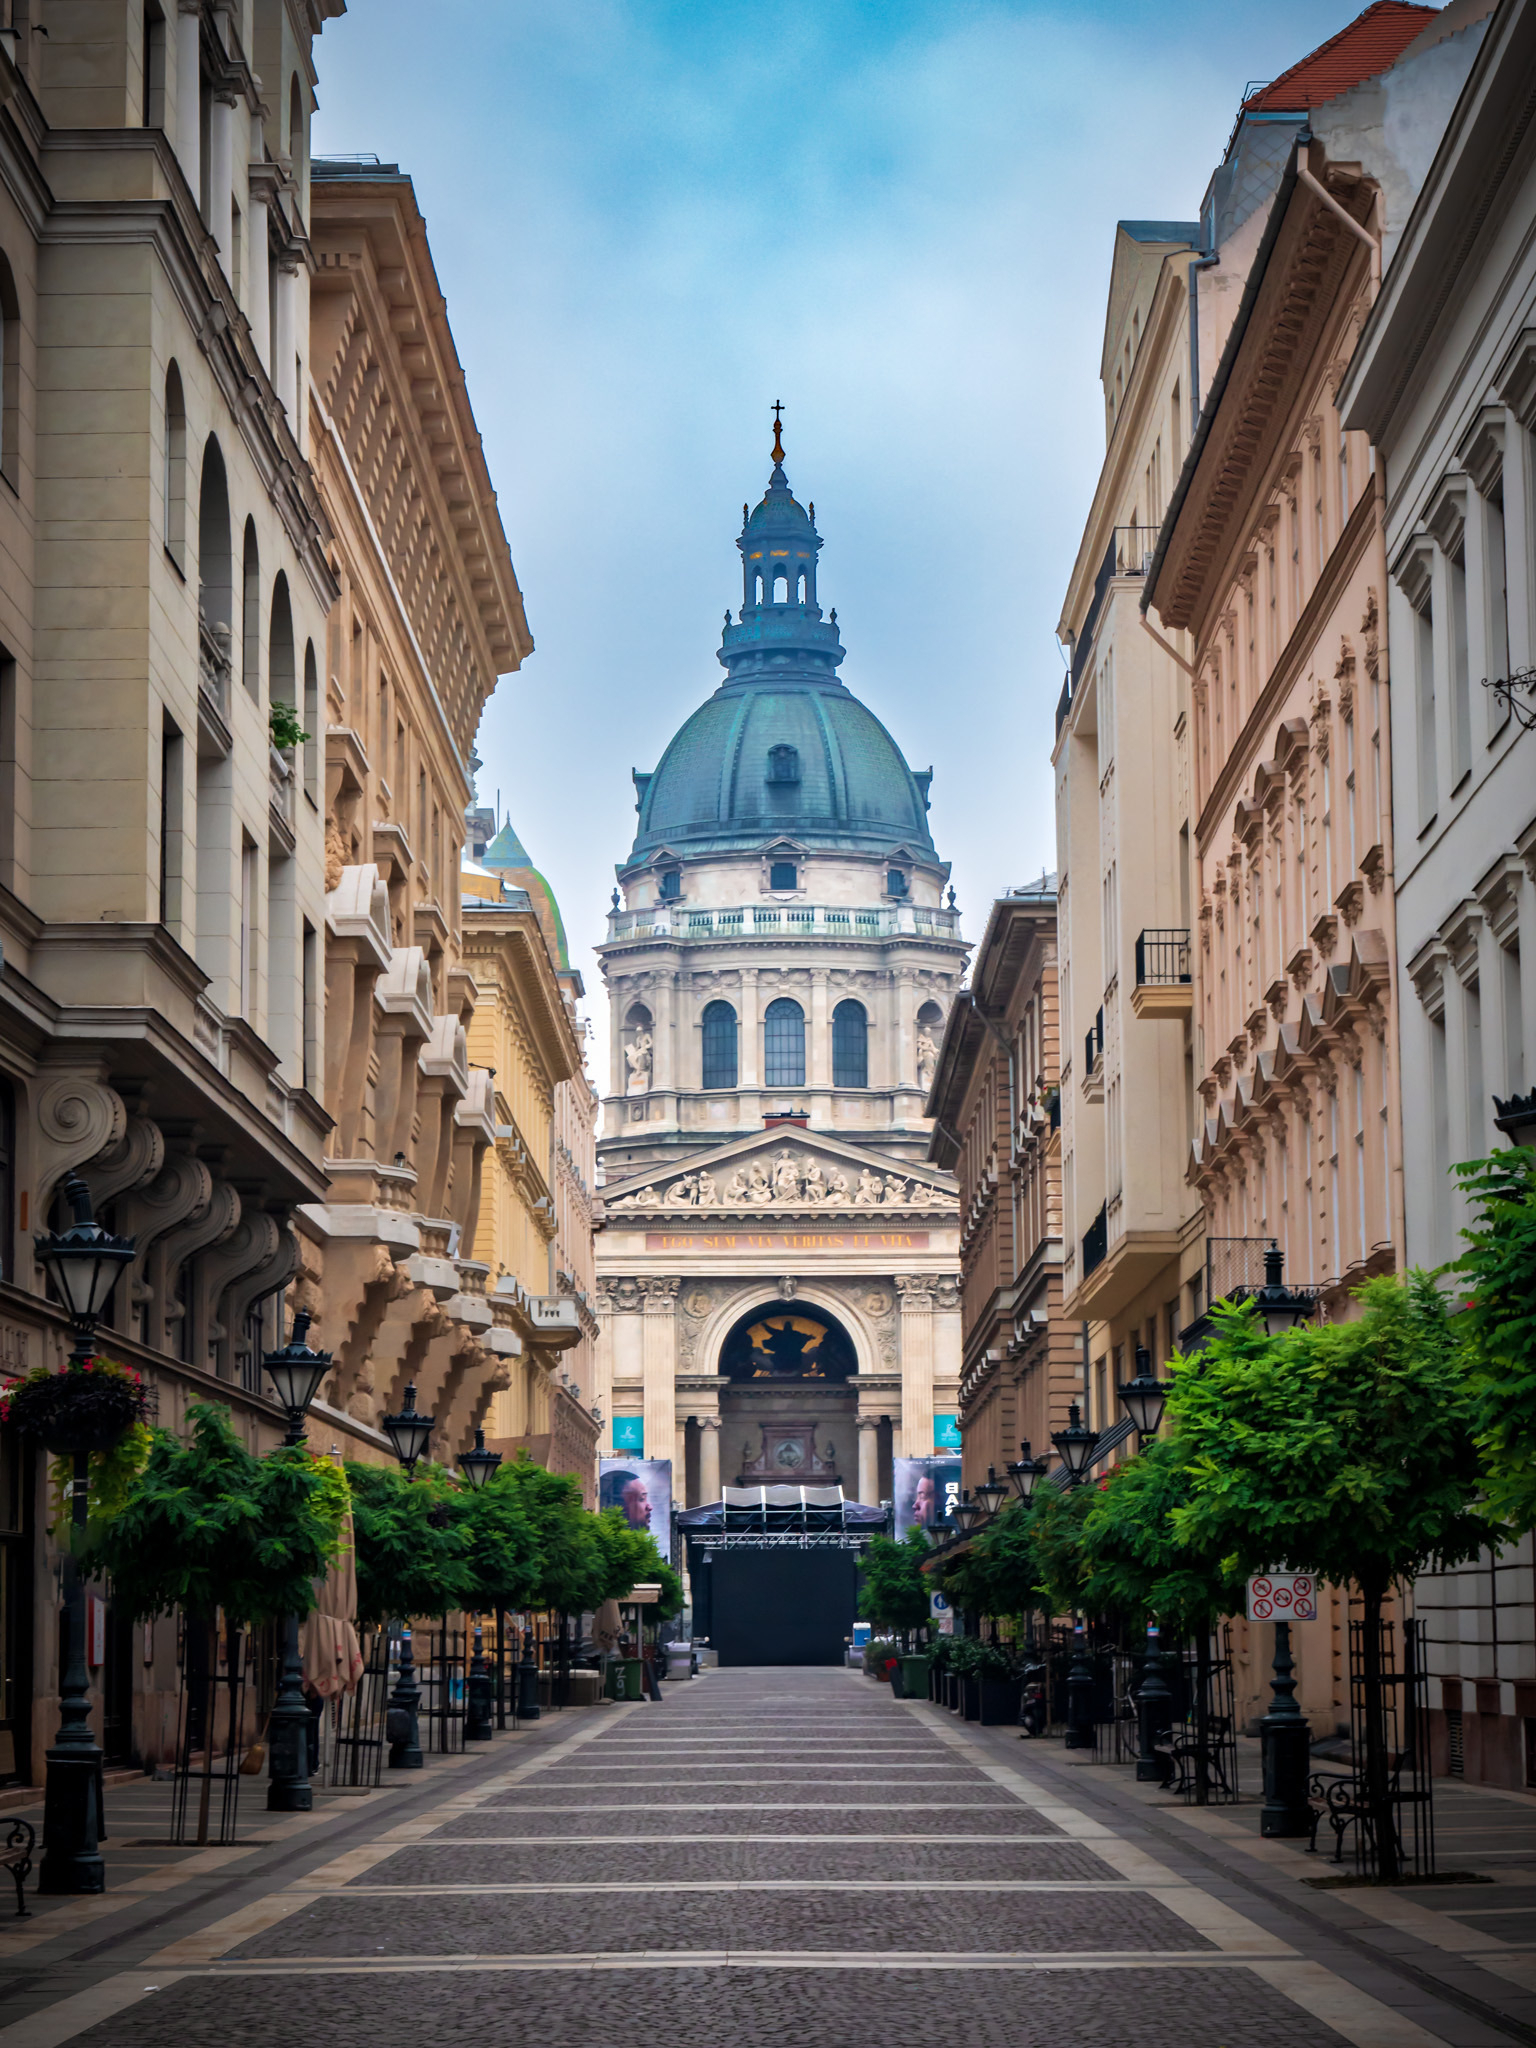 A view of St. Stephens Basilica in Budapest.